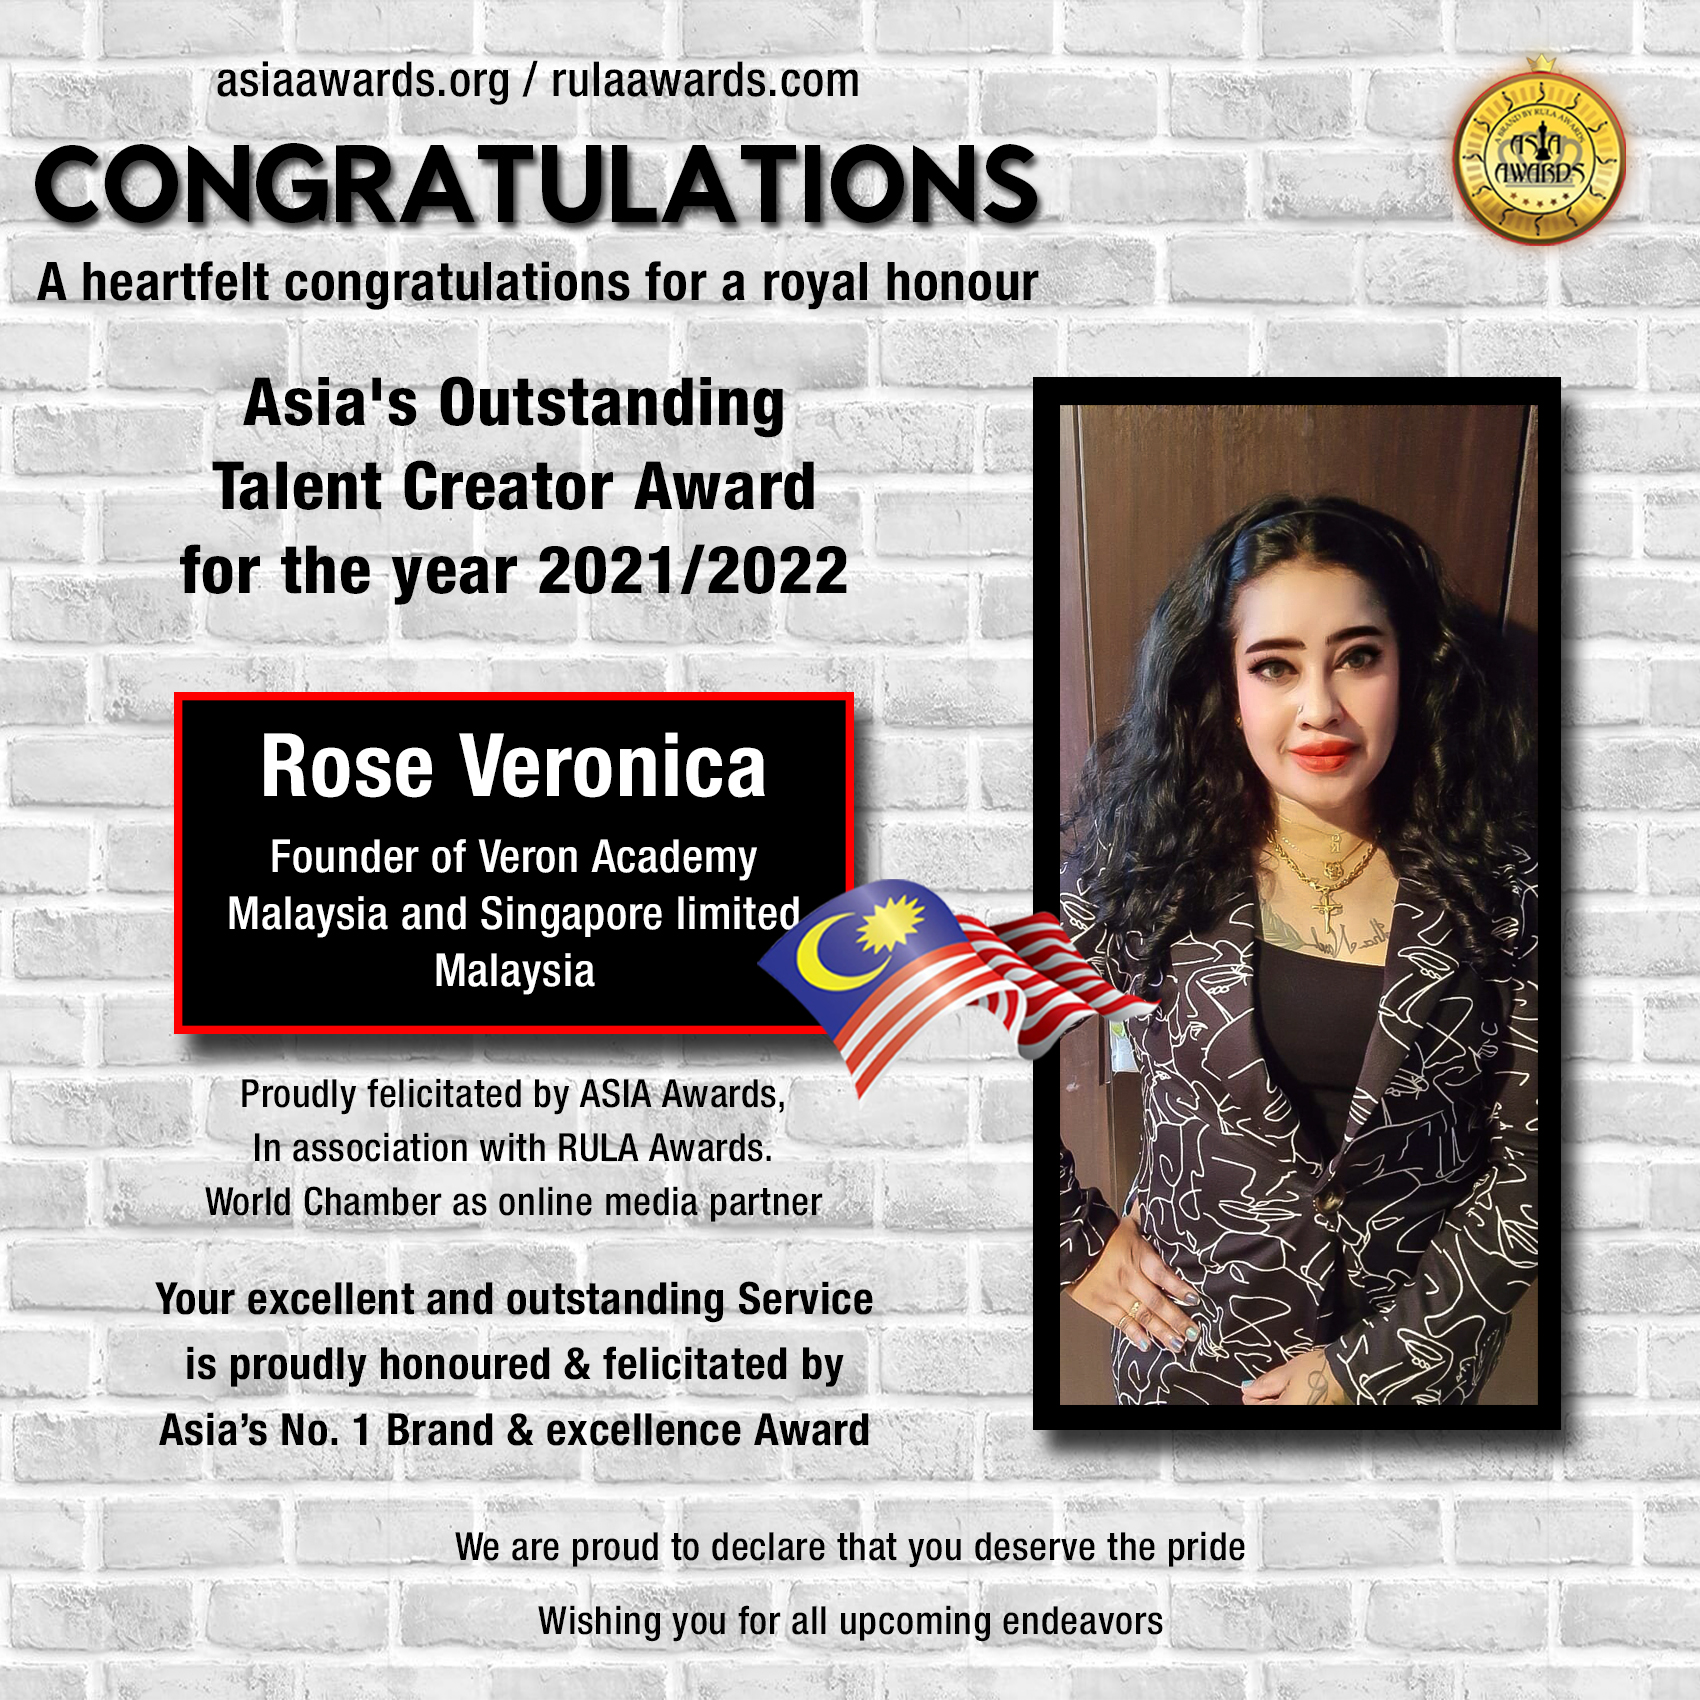 Rose Veronica has bagged Asia's Outstanding Talent Creator Award